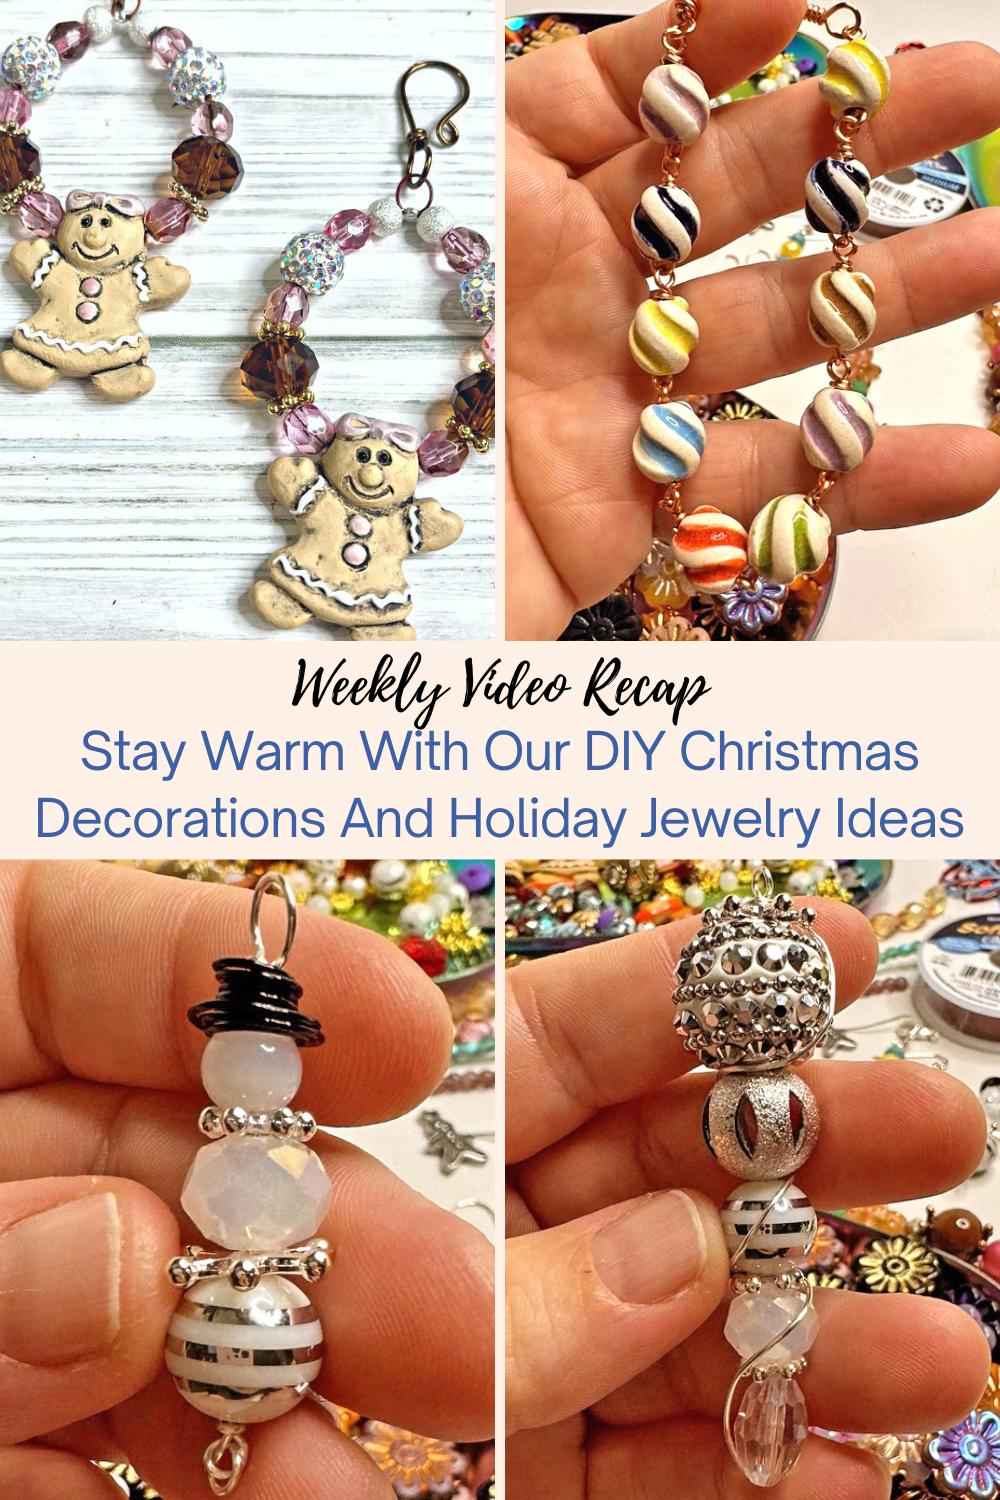 Stay Warm With Our DIY Christmas Decorations And Holiday Jewelry Ideas Collage